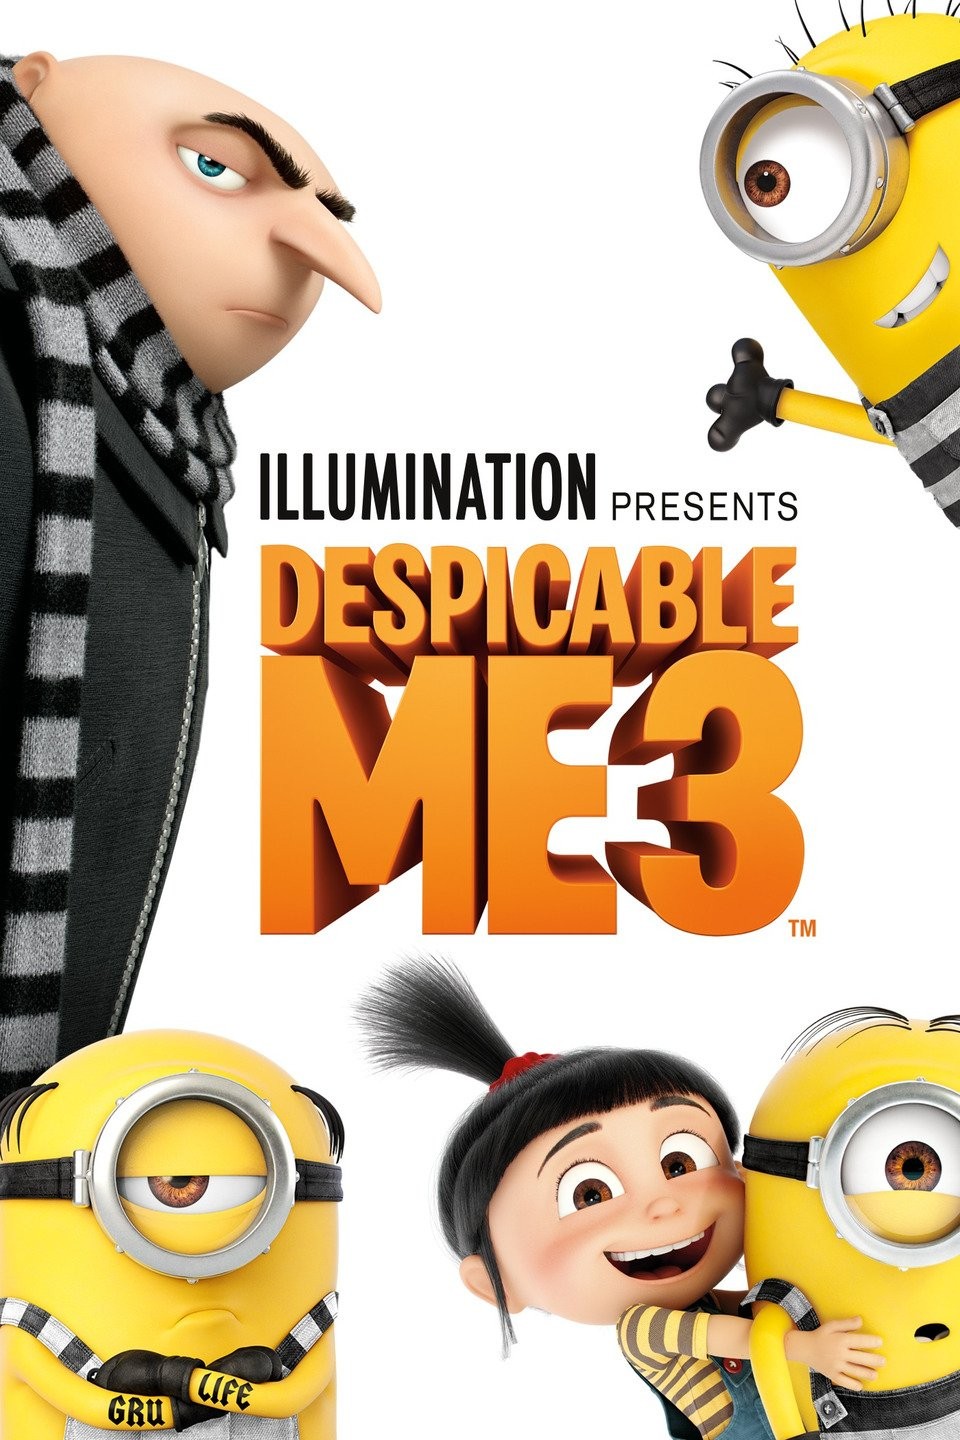 learn to sing Despicable Me 2's awfully cute trailer!!